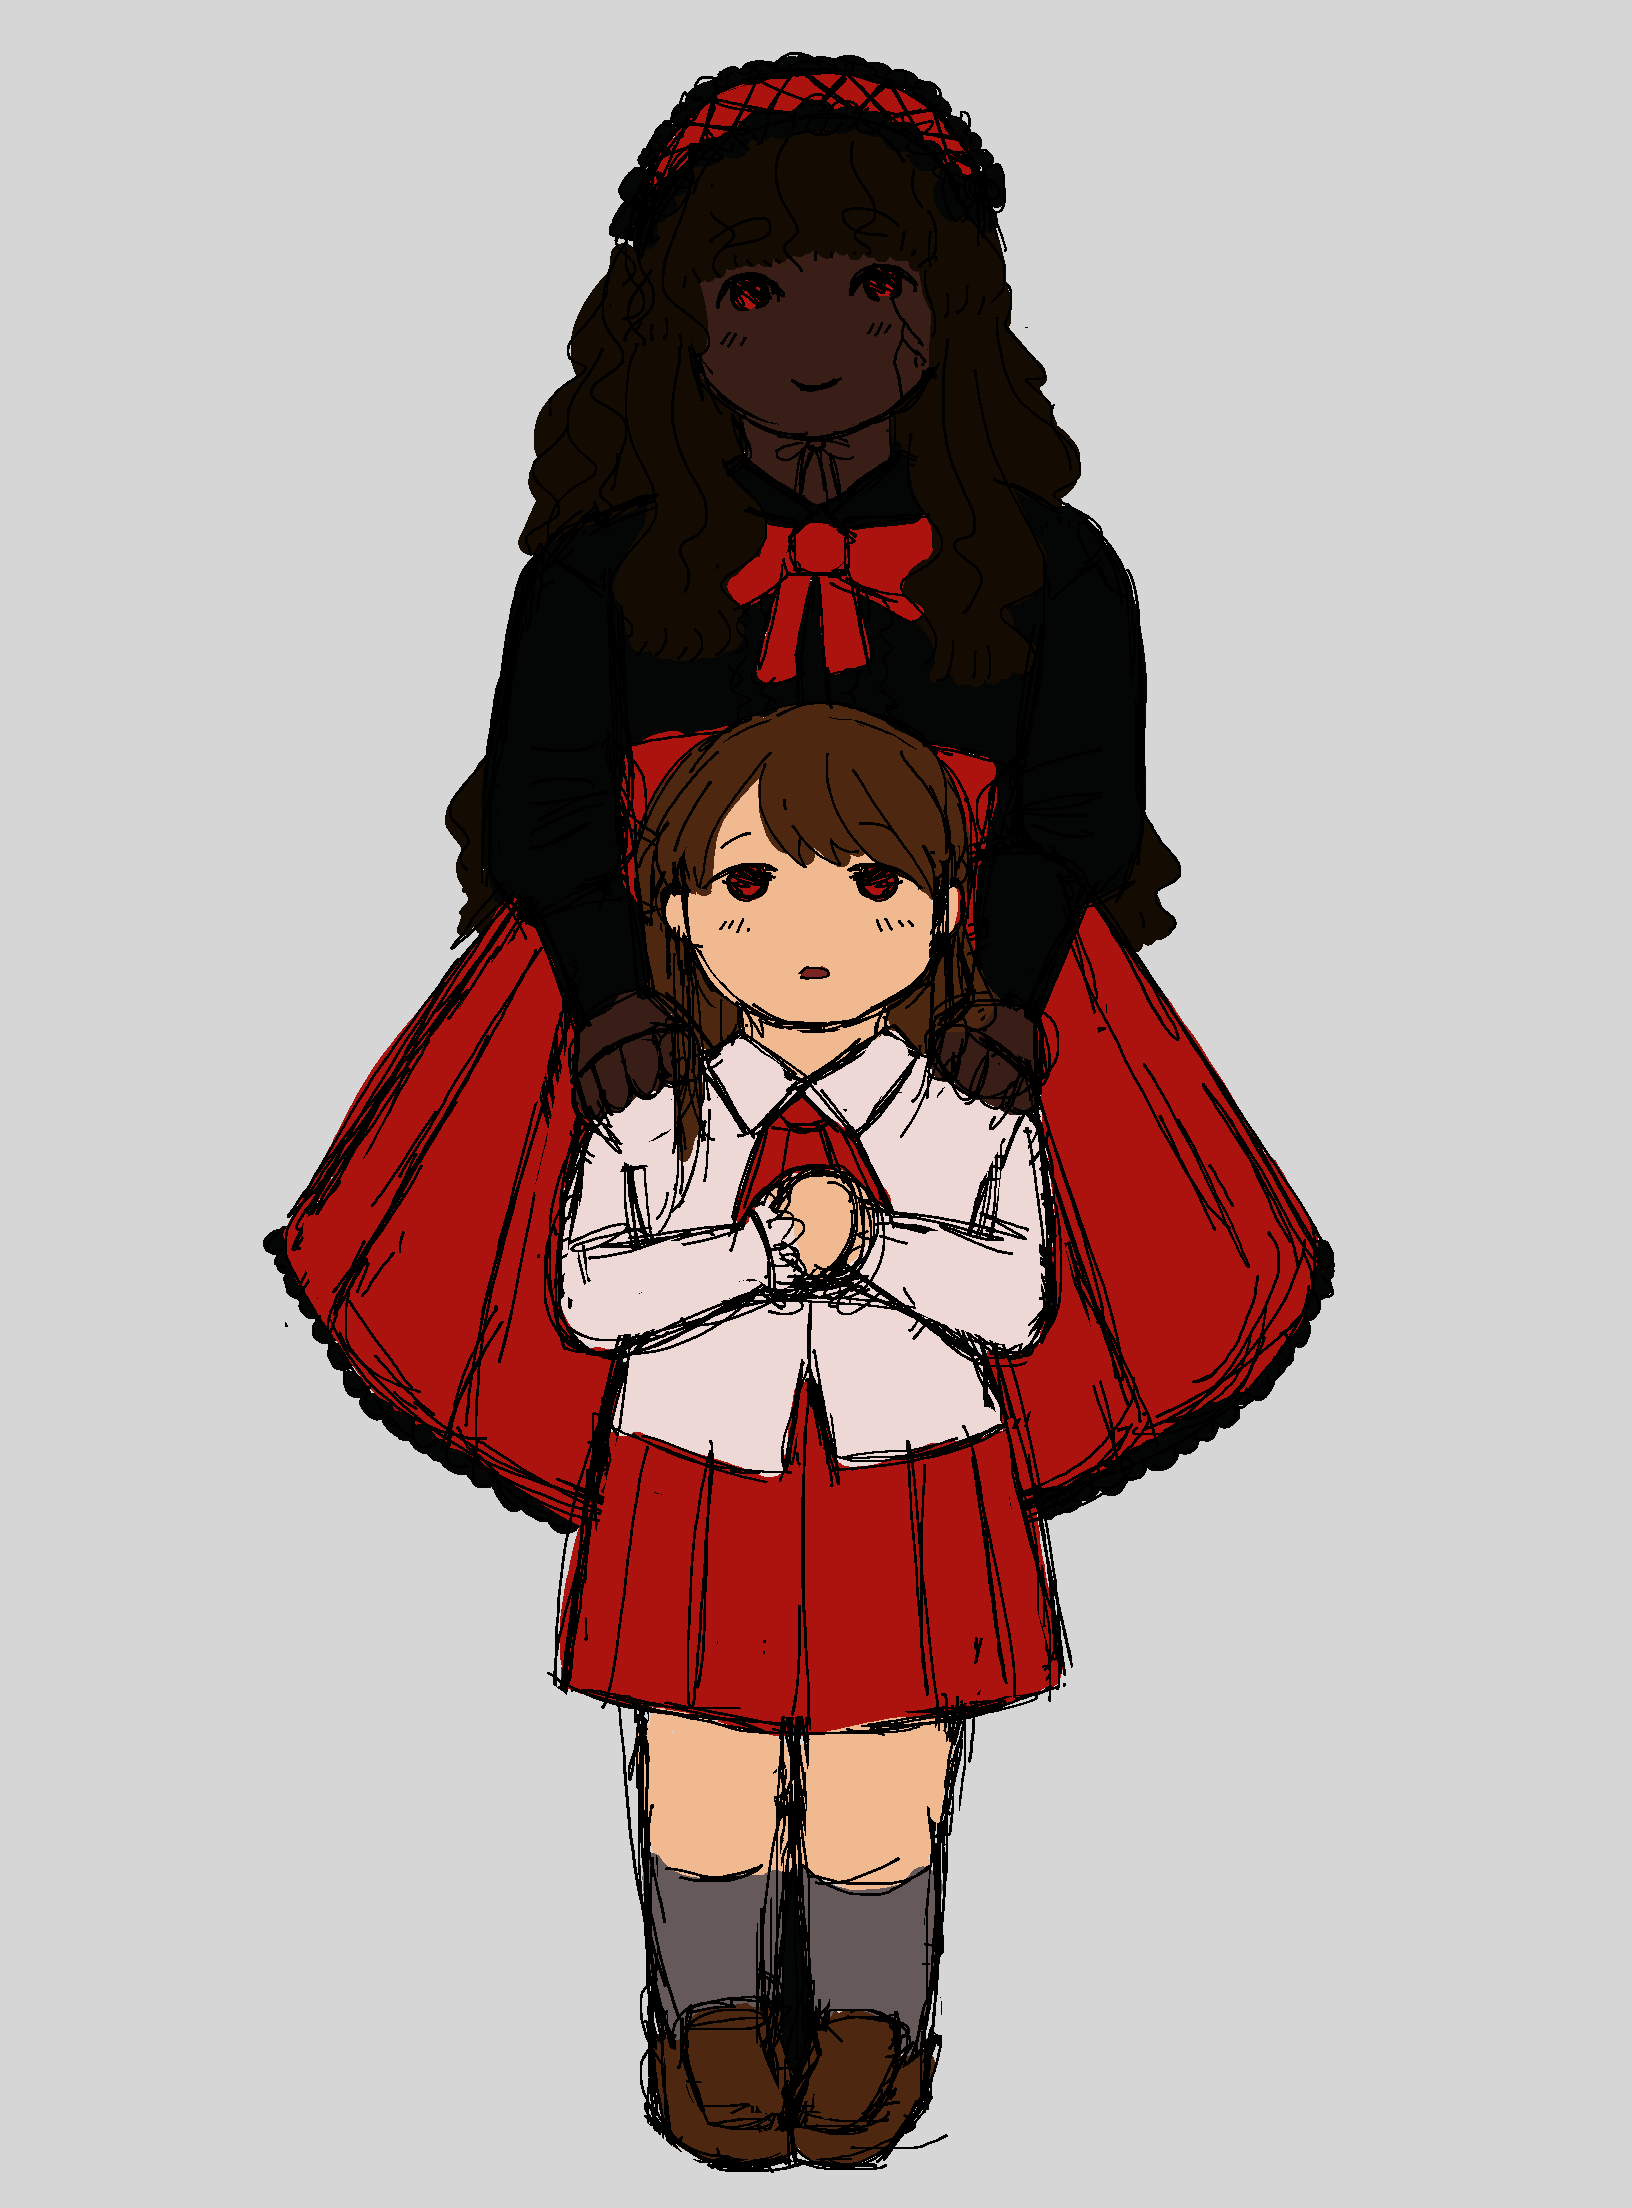 a doodle of Adeola and Ib from IB, Adeola has her hands placed on Ib's shoulders while Ib clapses her hands